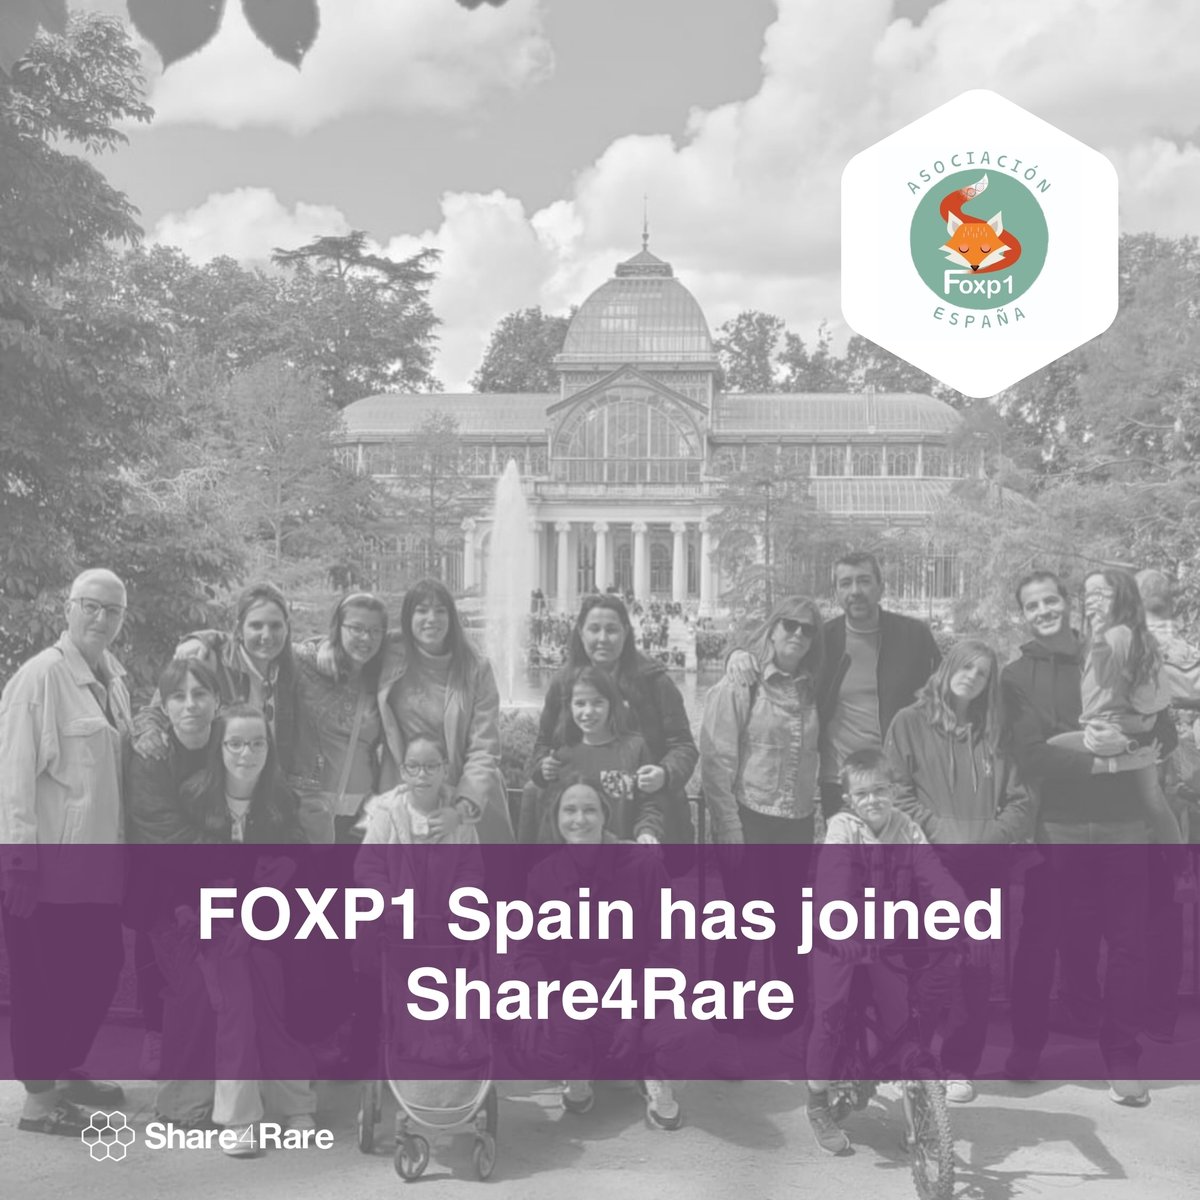 🎉 We are thrilled to welcome @asociacionfoxp1 to #Share4Rare! Joining forces is essential to support patients and families affected by #rarediseases

📣 Calling all patient organisations to join us on this journey too! Together we can make a difference ✍️ share4rare.org/join_as_patien…